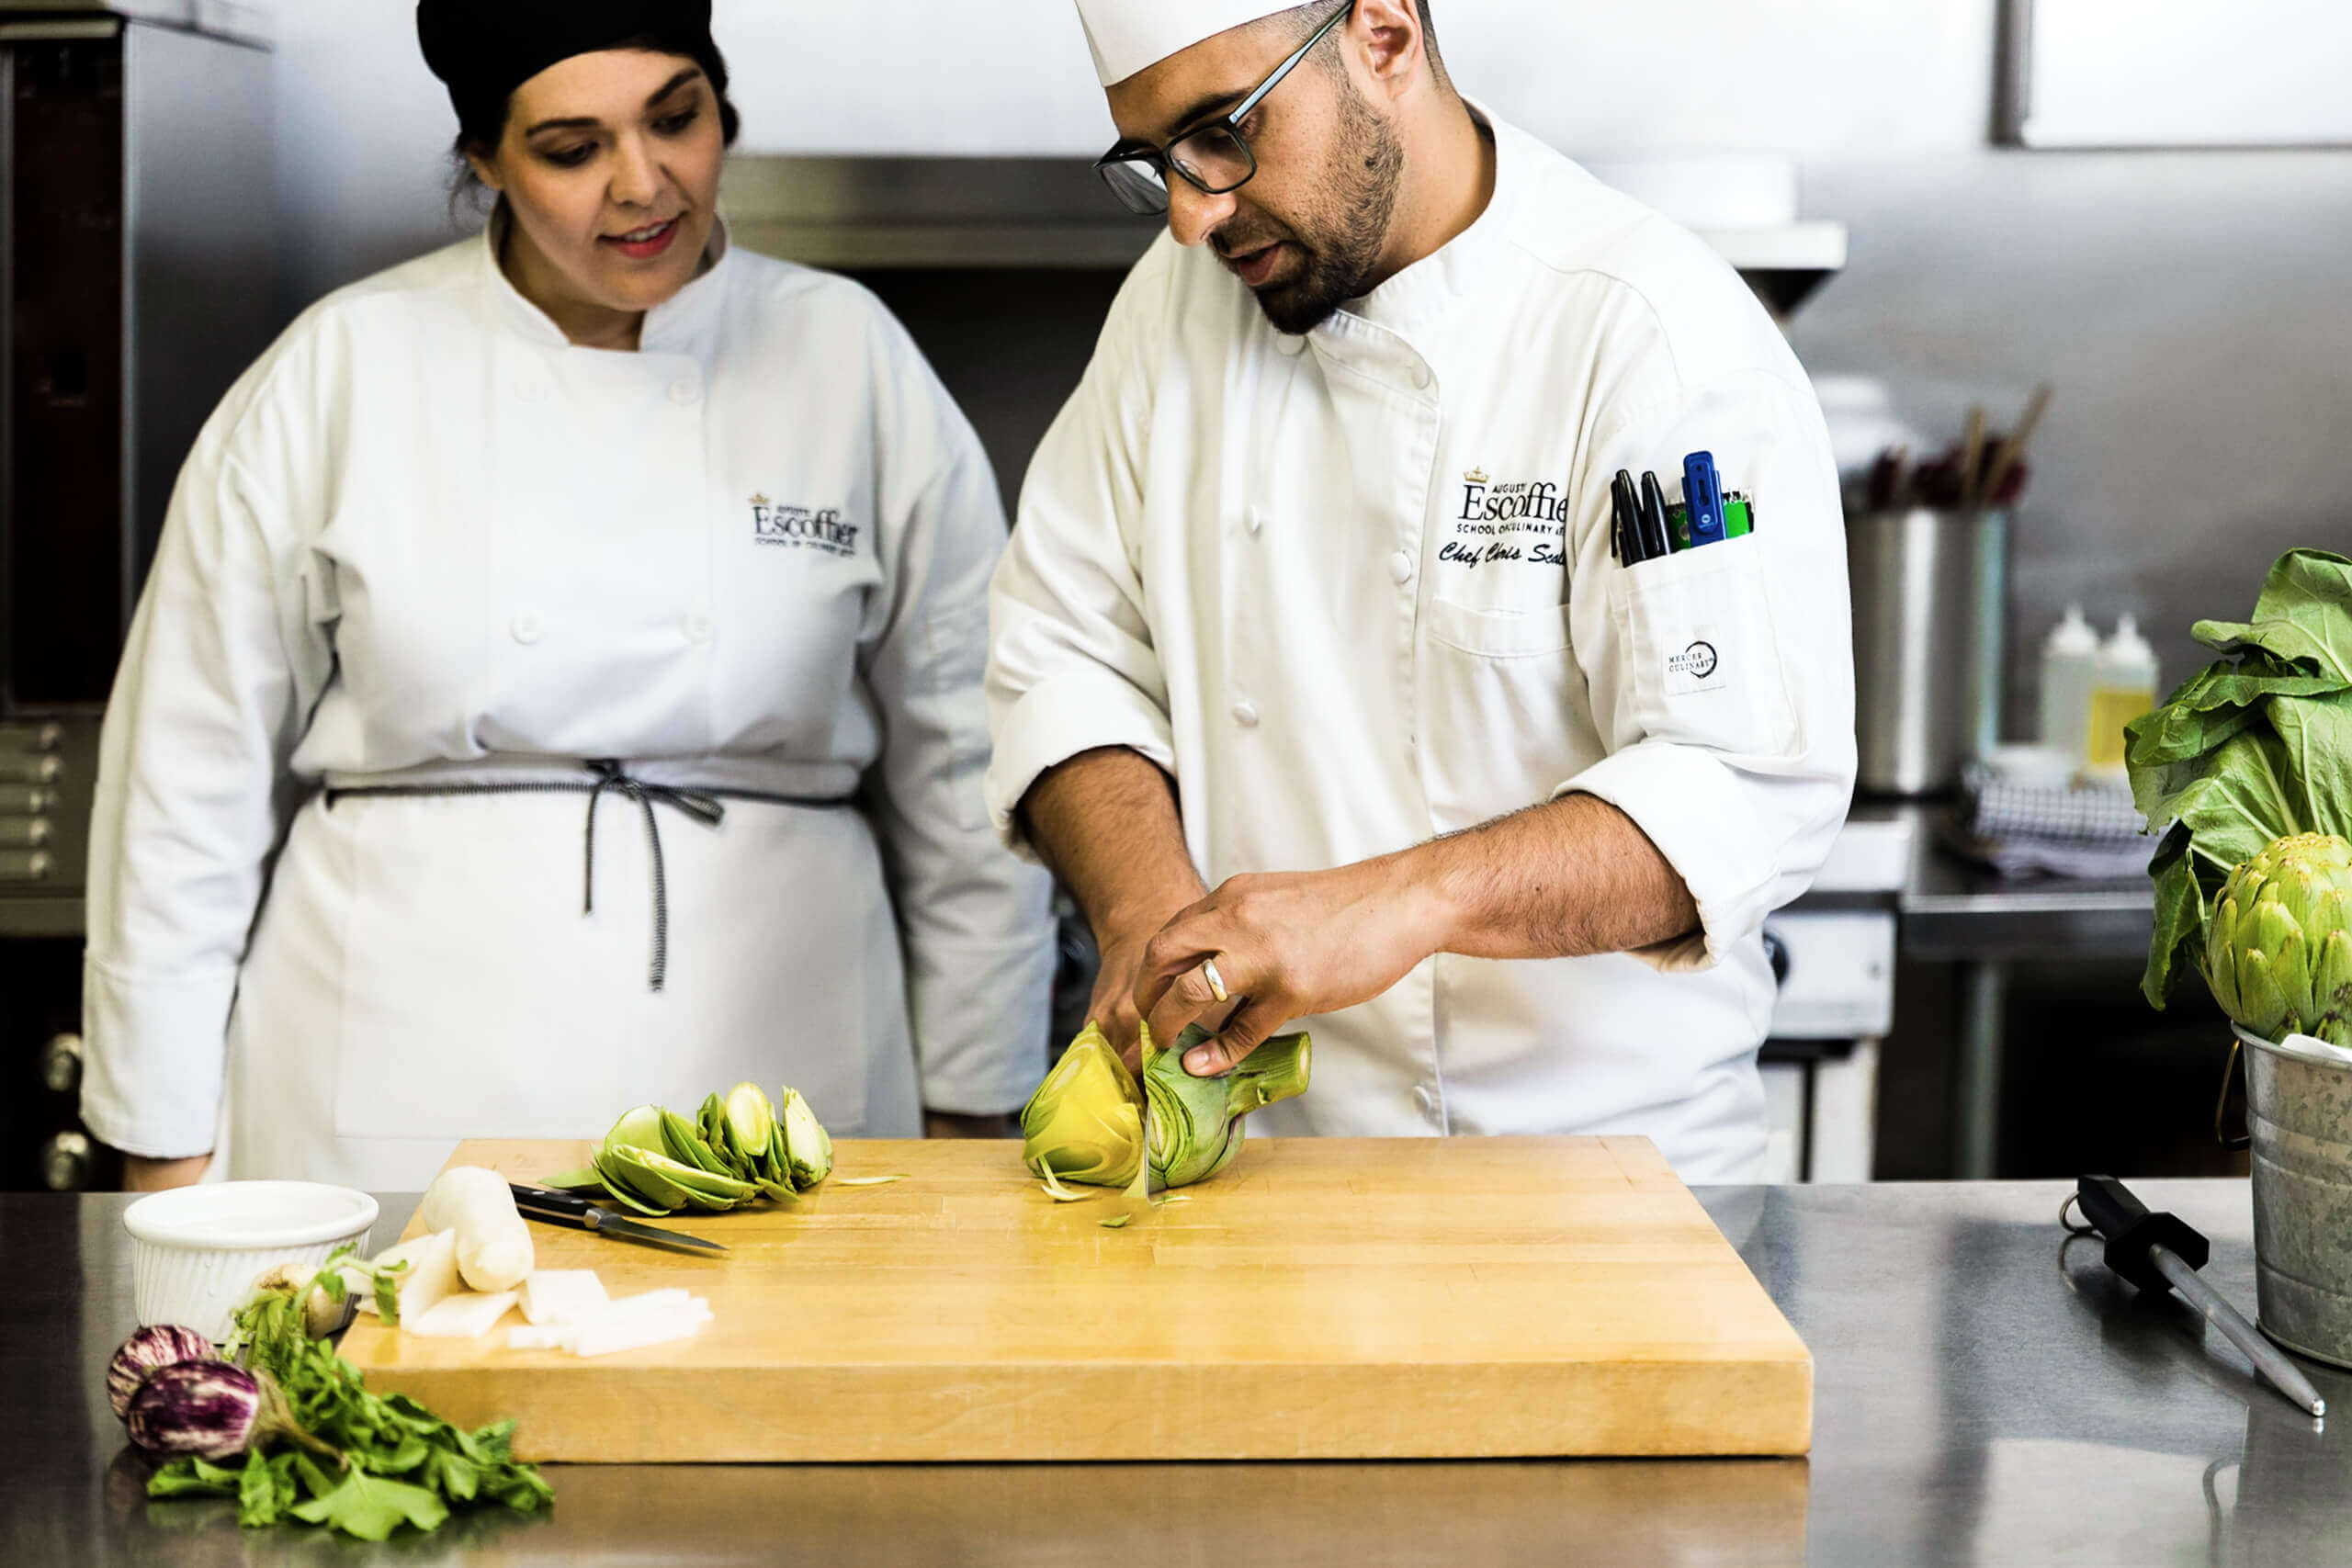 Male chef instructor showing female culinary student how to chop vegetables